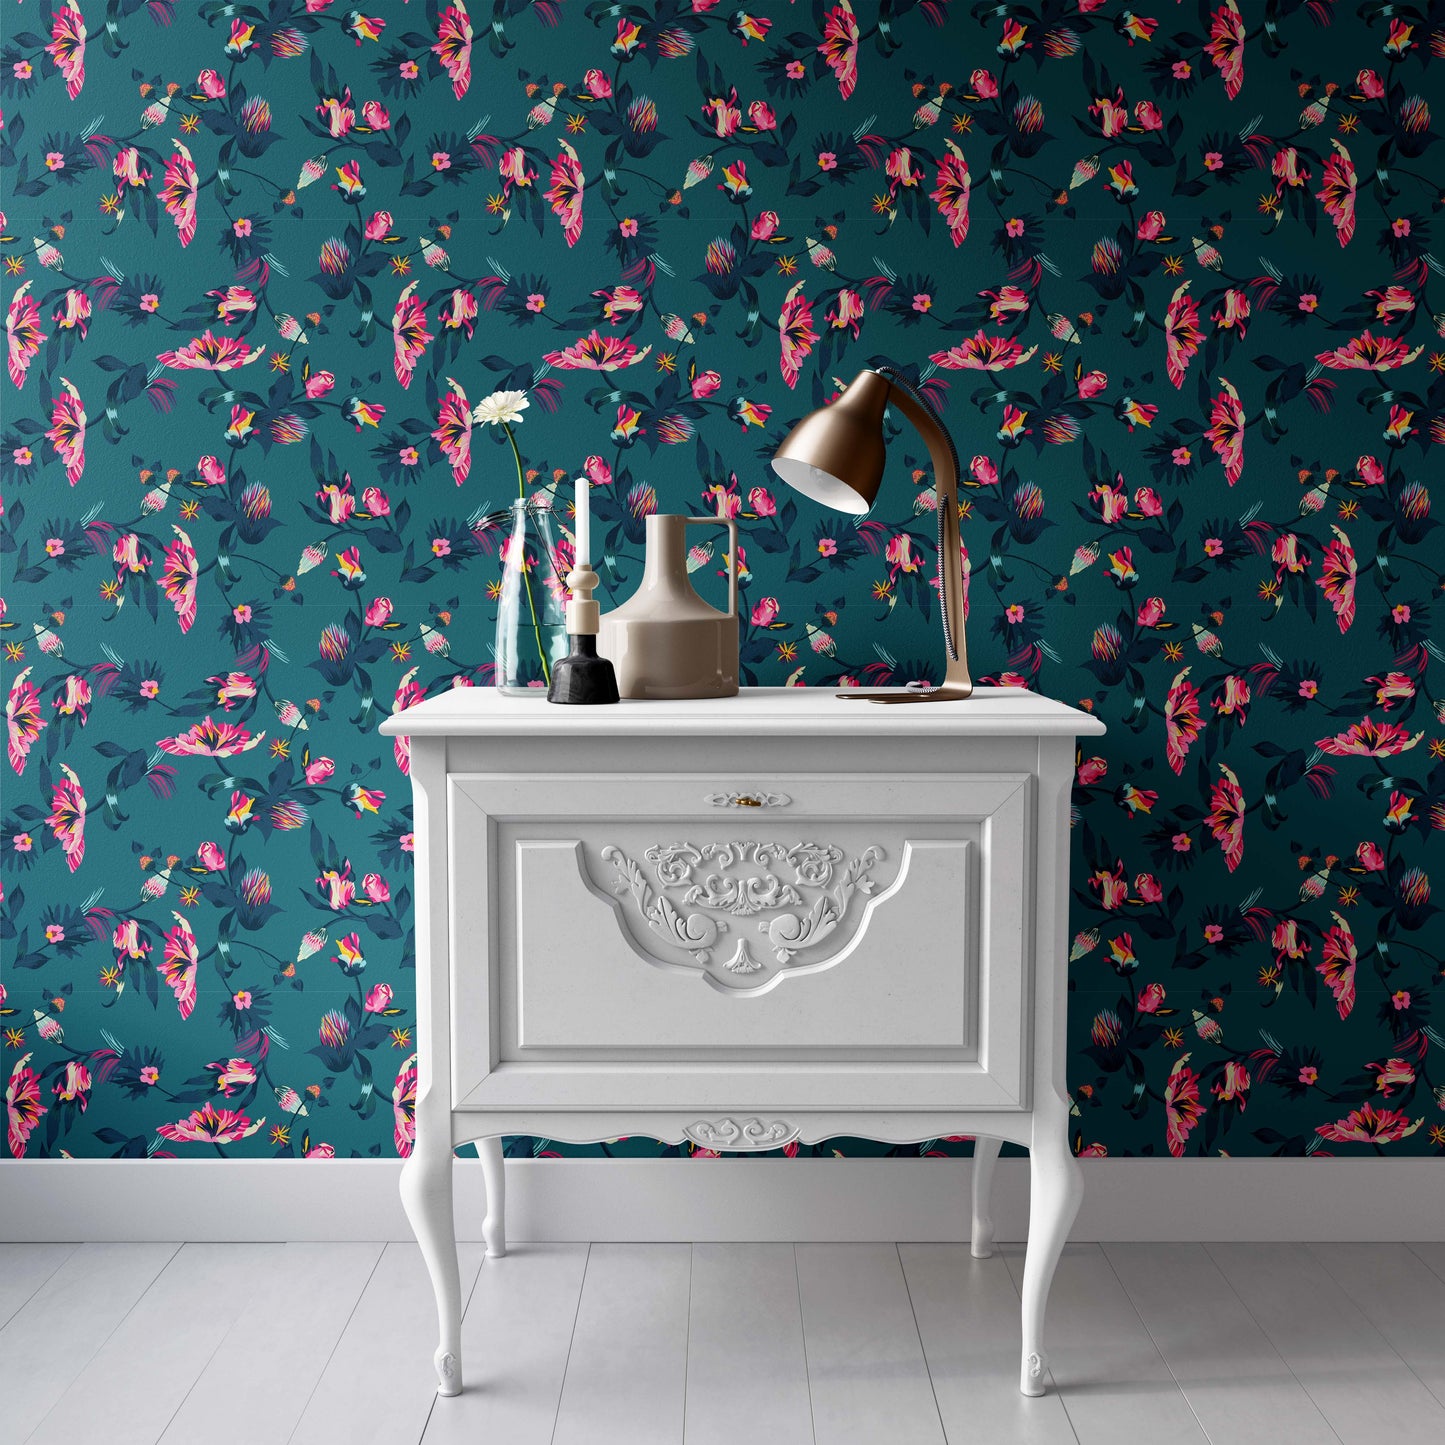 Exotica | Clay Coated | Wallpaper